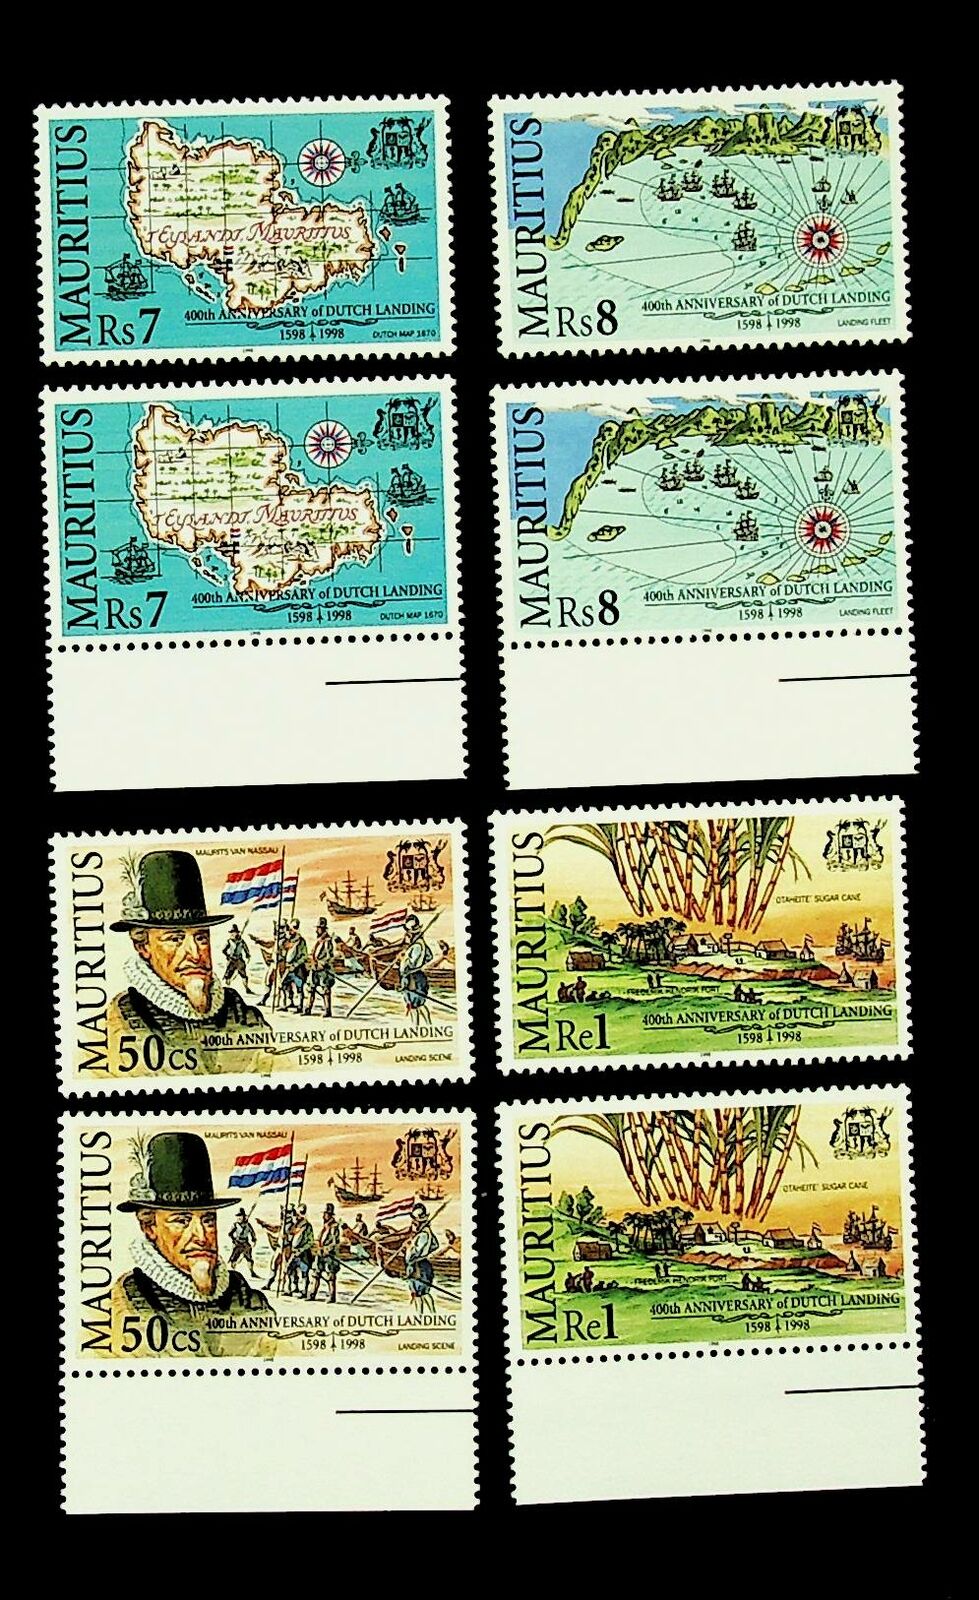 MAURITIUS 1998 400TH Sales for sale New Orleans Mall ANNIVERSARY OF MARG SET 4 DUTCH LANDING